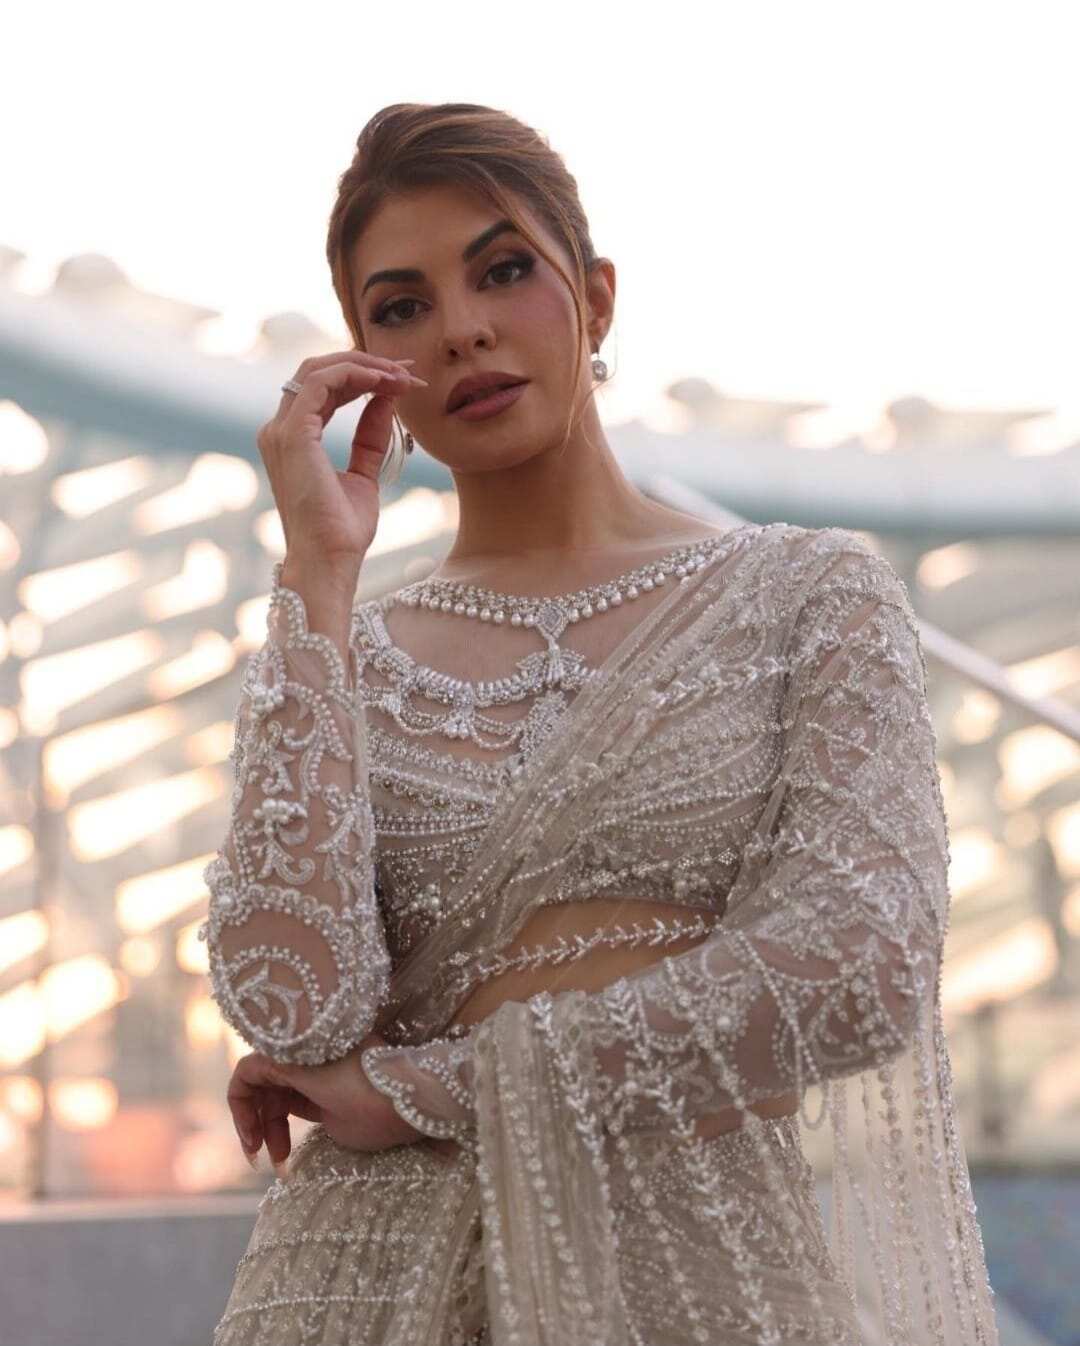 Jacqueline Fernandez looks like a goddess in a pearl white saree